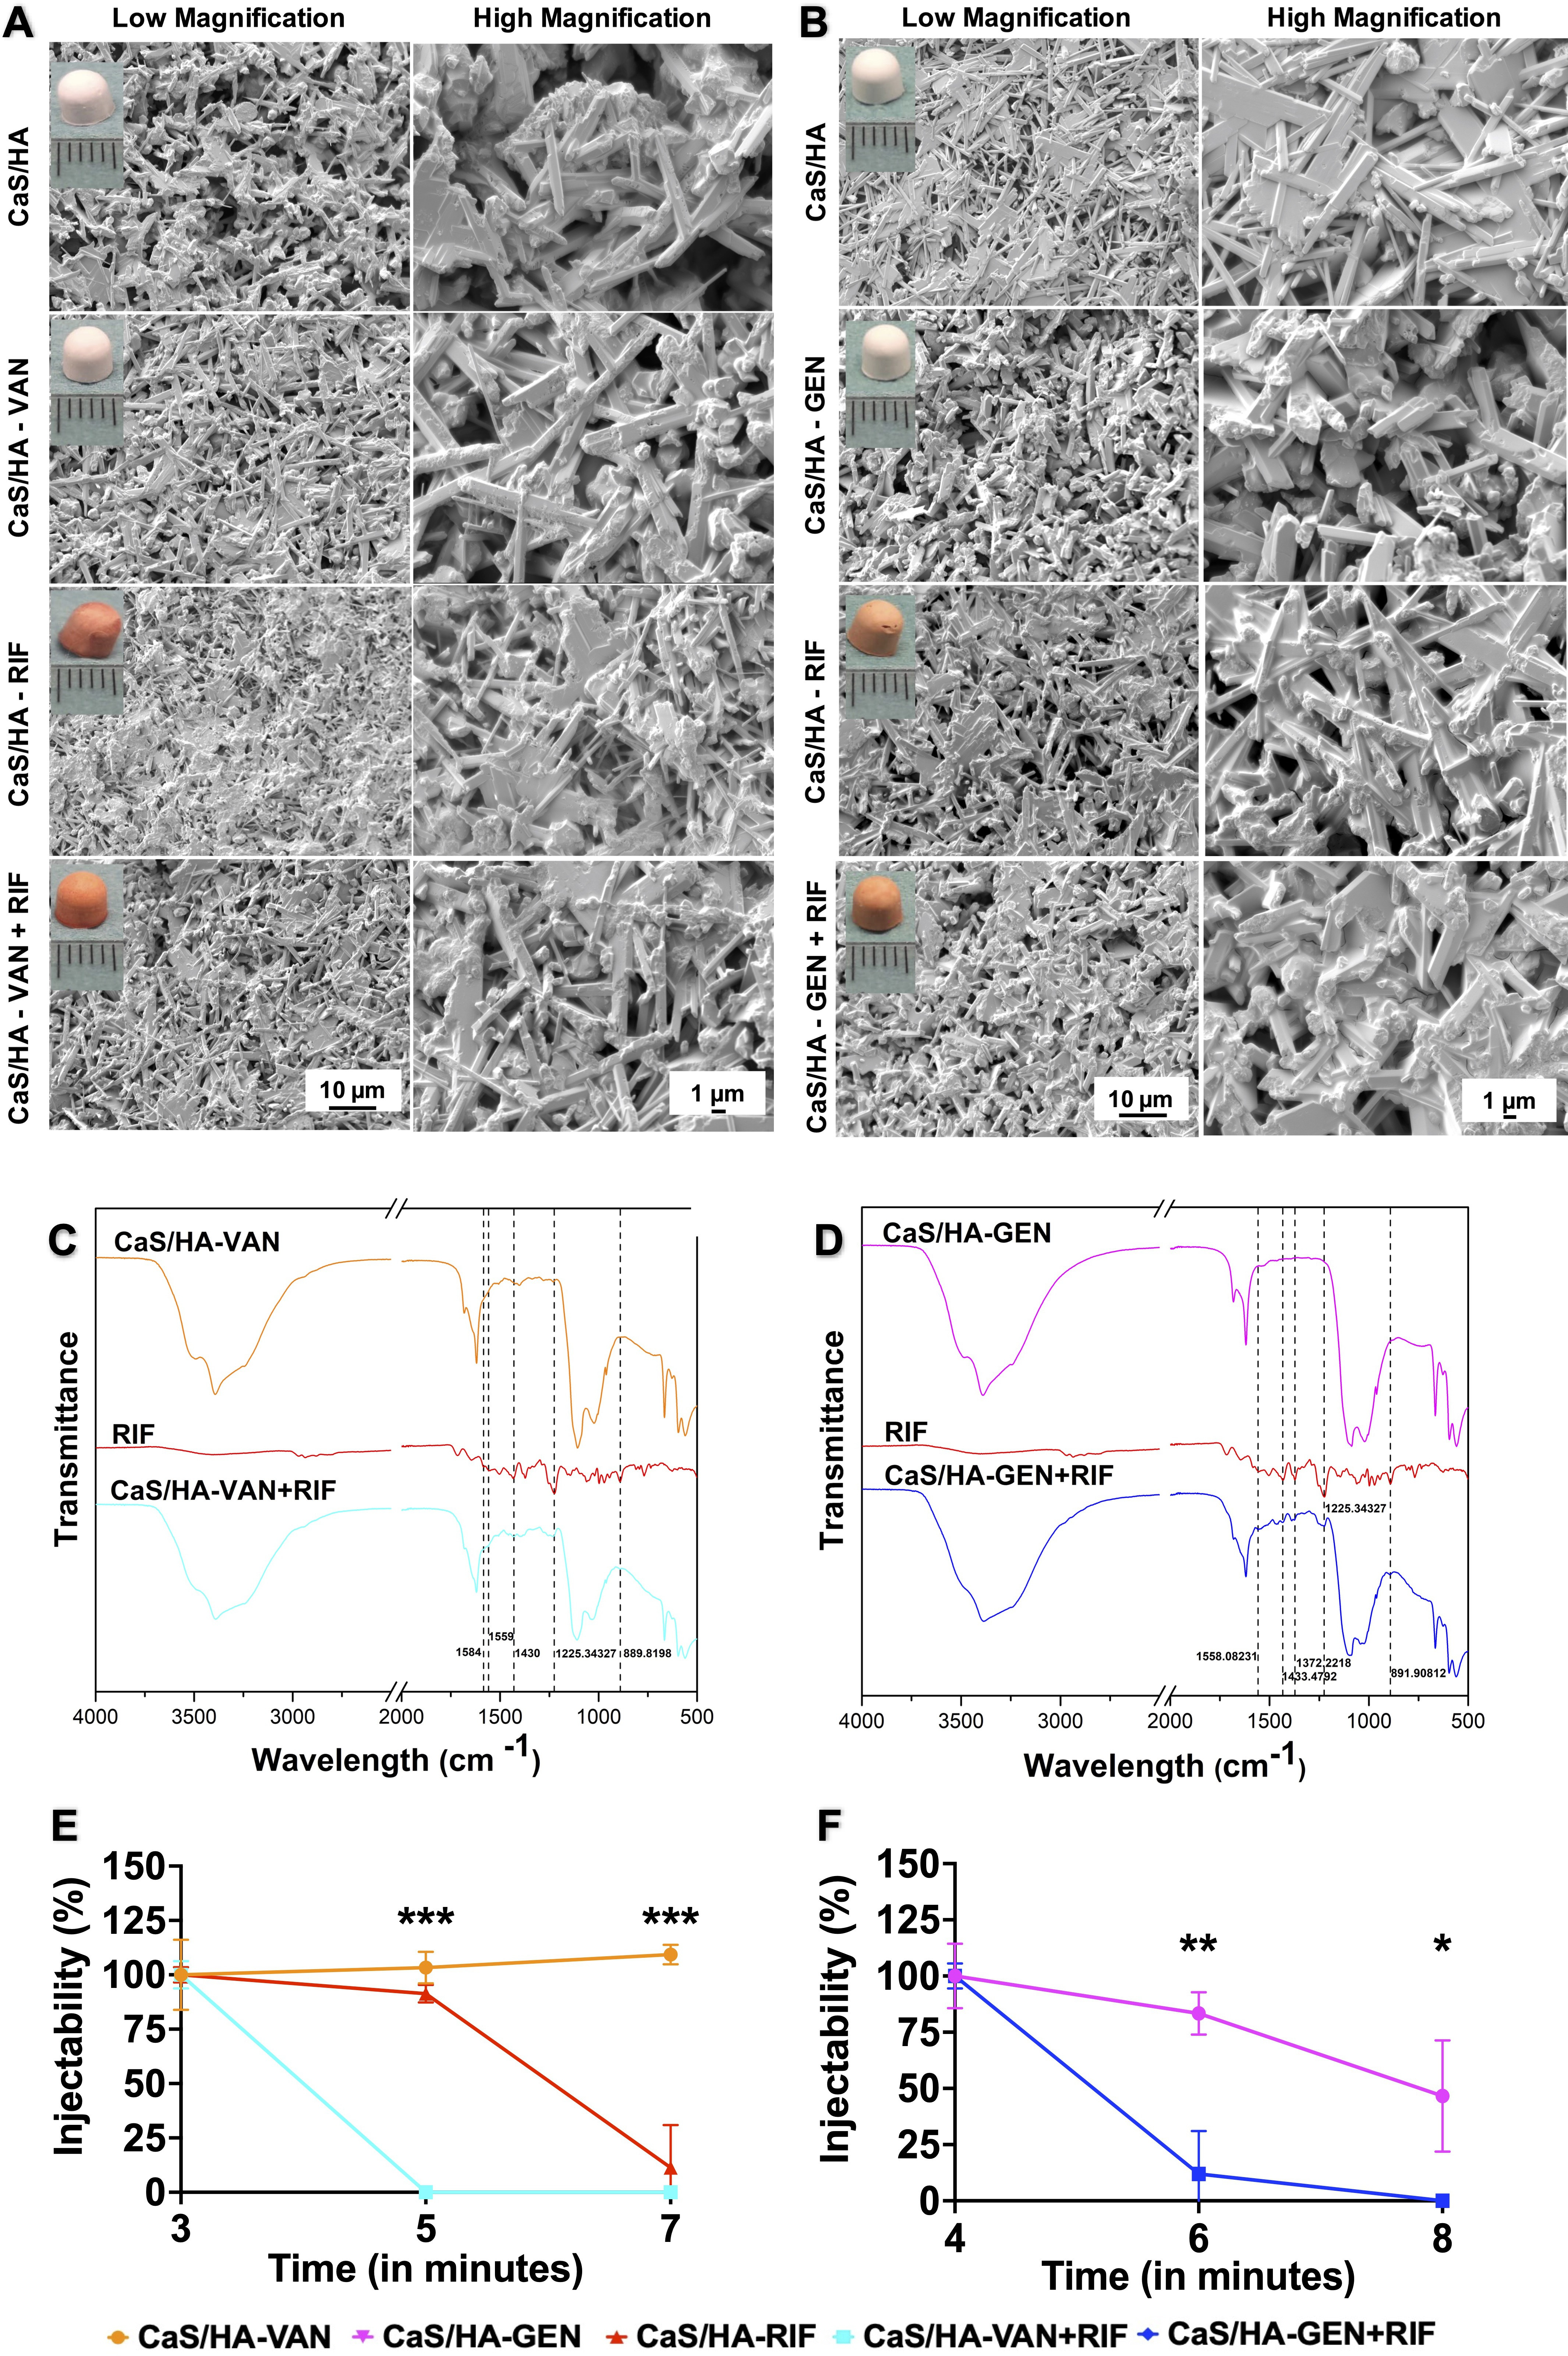 Fig. 1 
            Morphological and physiochemical characterization of calcium sulphate/hydroxyapatite-vancomycin/gentamicin (CaS/HA-VAN/GEN) with or without rifamipicin (RIF). a) and b) Scanning electron microscopy (SEM) images showing surface characteristics and pore distribution of CaS/HA-VAN/GEN pellets with or without RIF. Hemispherical pellets casted using an elastic mould of 4.8 mm diameter are shown in inset of a) and b). c) and d) Fourier transform infrared spectroscopy (FTIR) spectra from: c) CaS/HA-VAN, pure RIF, or CaS/HA-VAN + RIF; and d) CaS/HA-GEN, pure RIF, or CaS/HA-GEN + RIF. e) and f) Injectability of tested CaS/HA-VAN/GEN composites with or without RIF. An independent-samples t-test was used to compare the injectability of CaS/HA having VAN/GEN alone or in combination with RIF. *p < 0.05, **p < 0.01, ***p < 0.001.
          